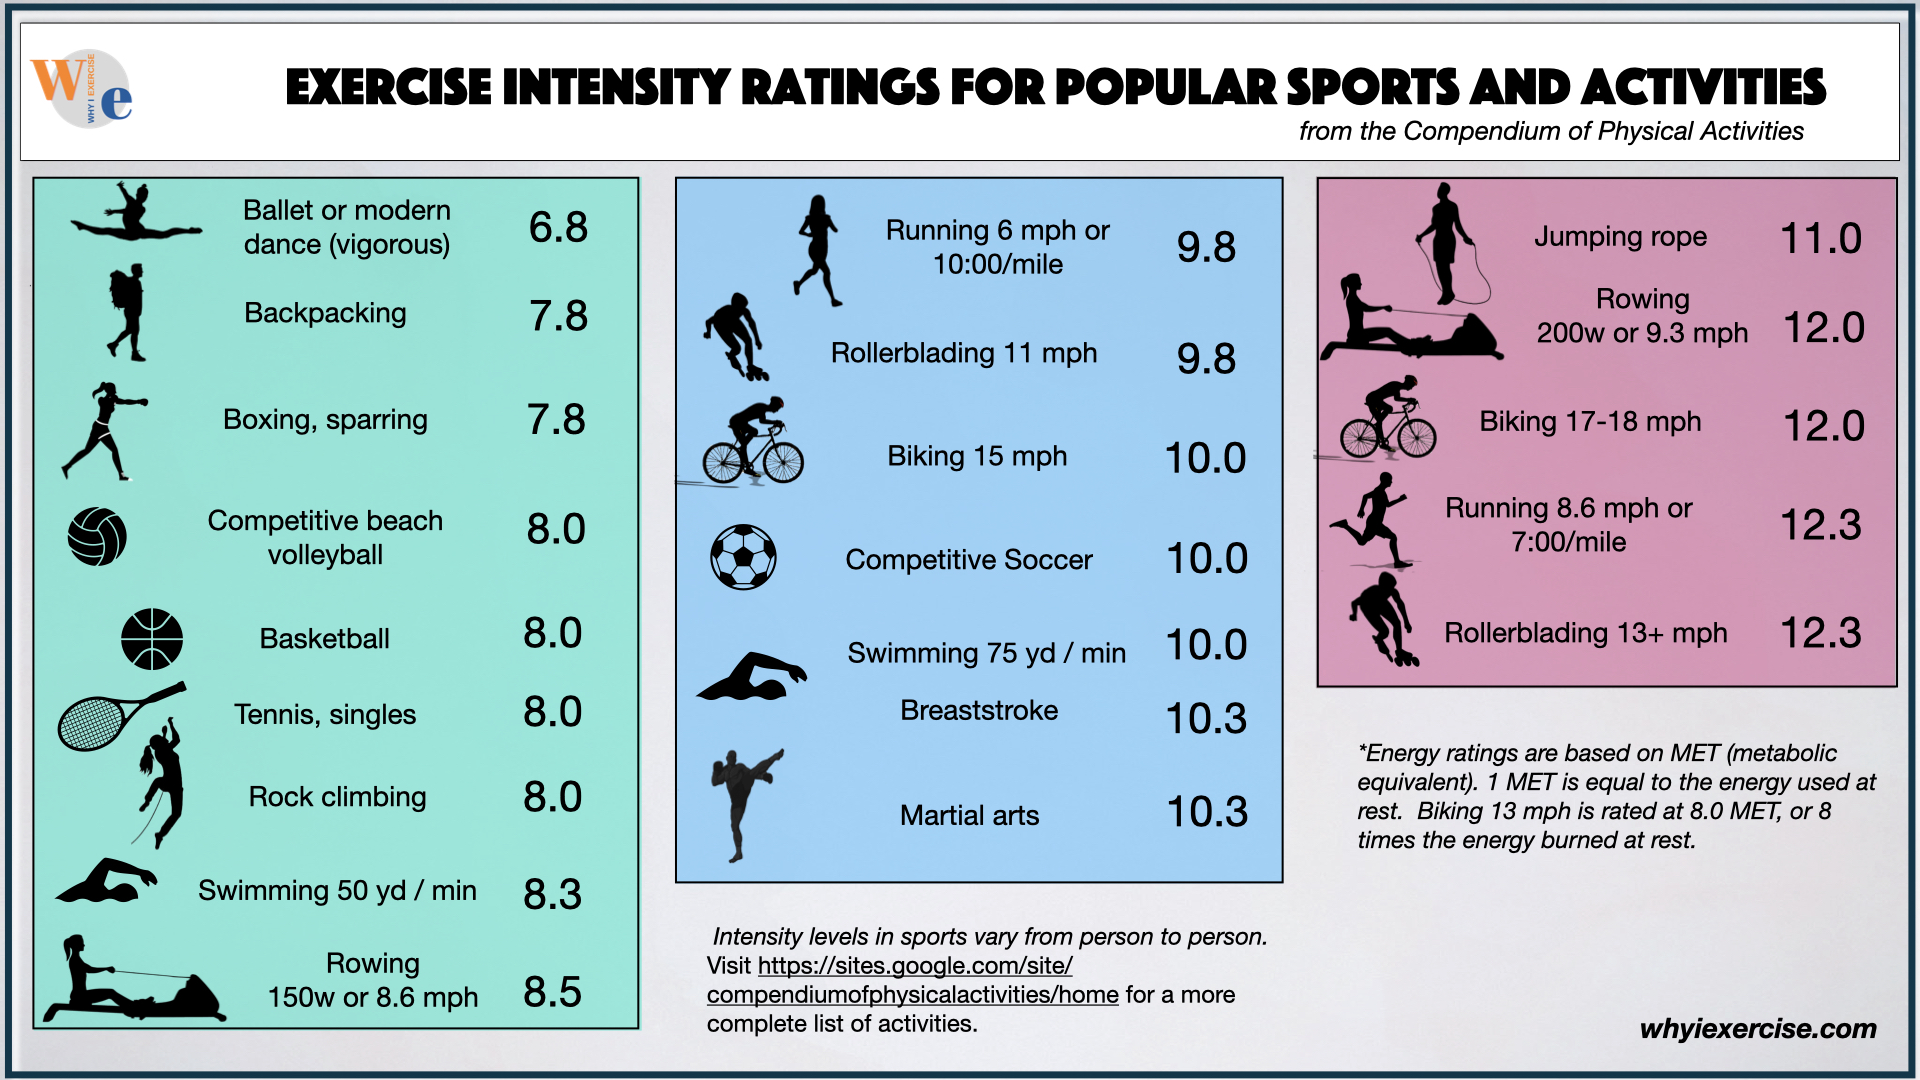 Exercise intensity comparison for popular sports.